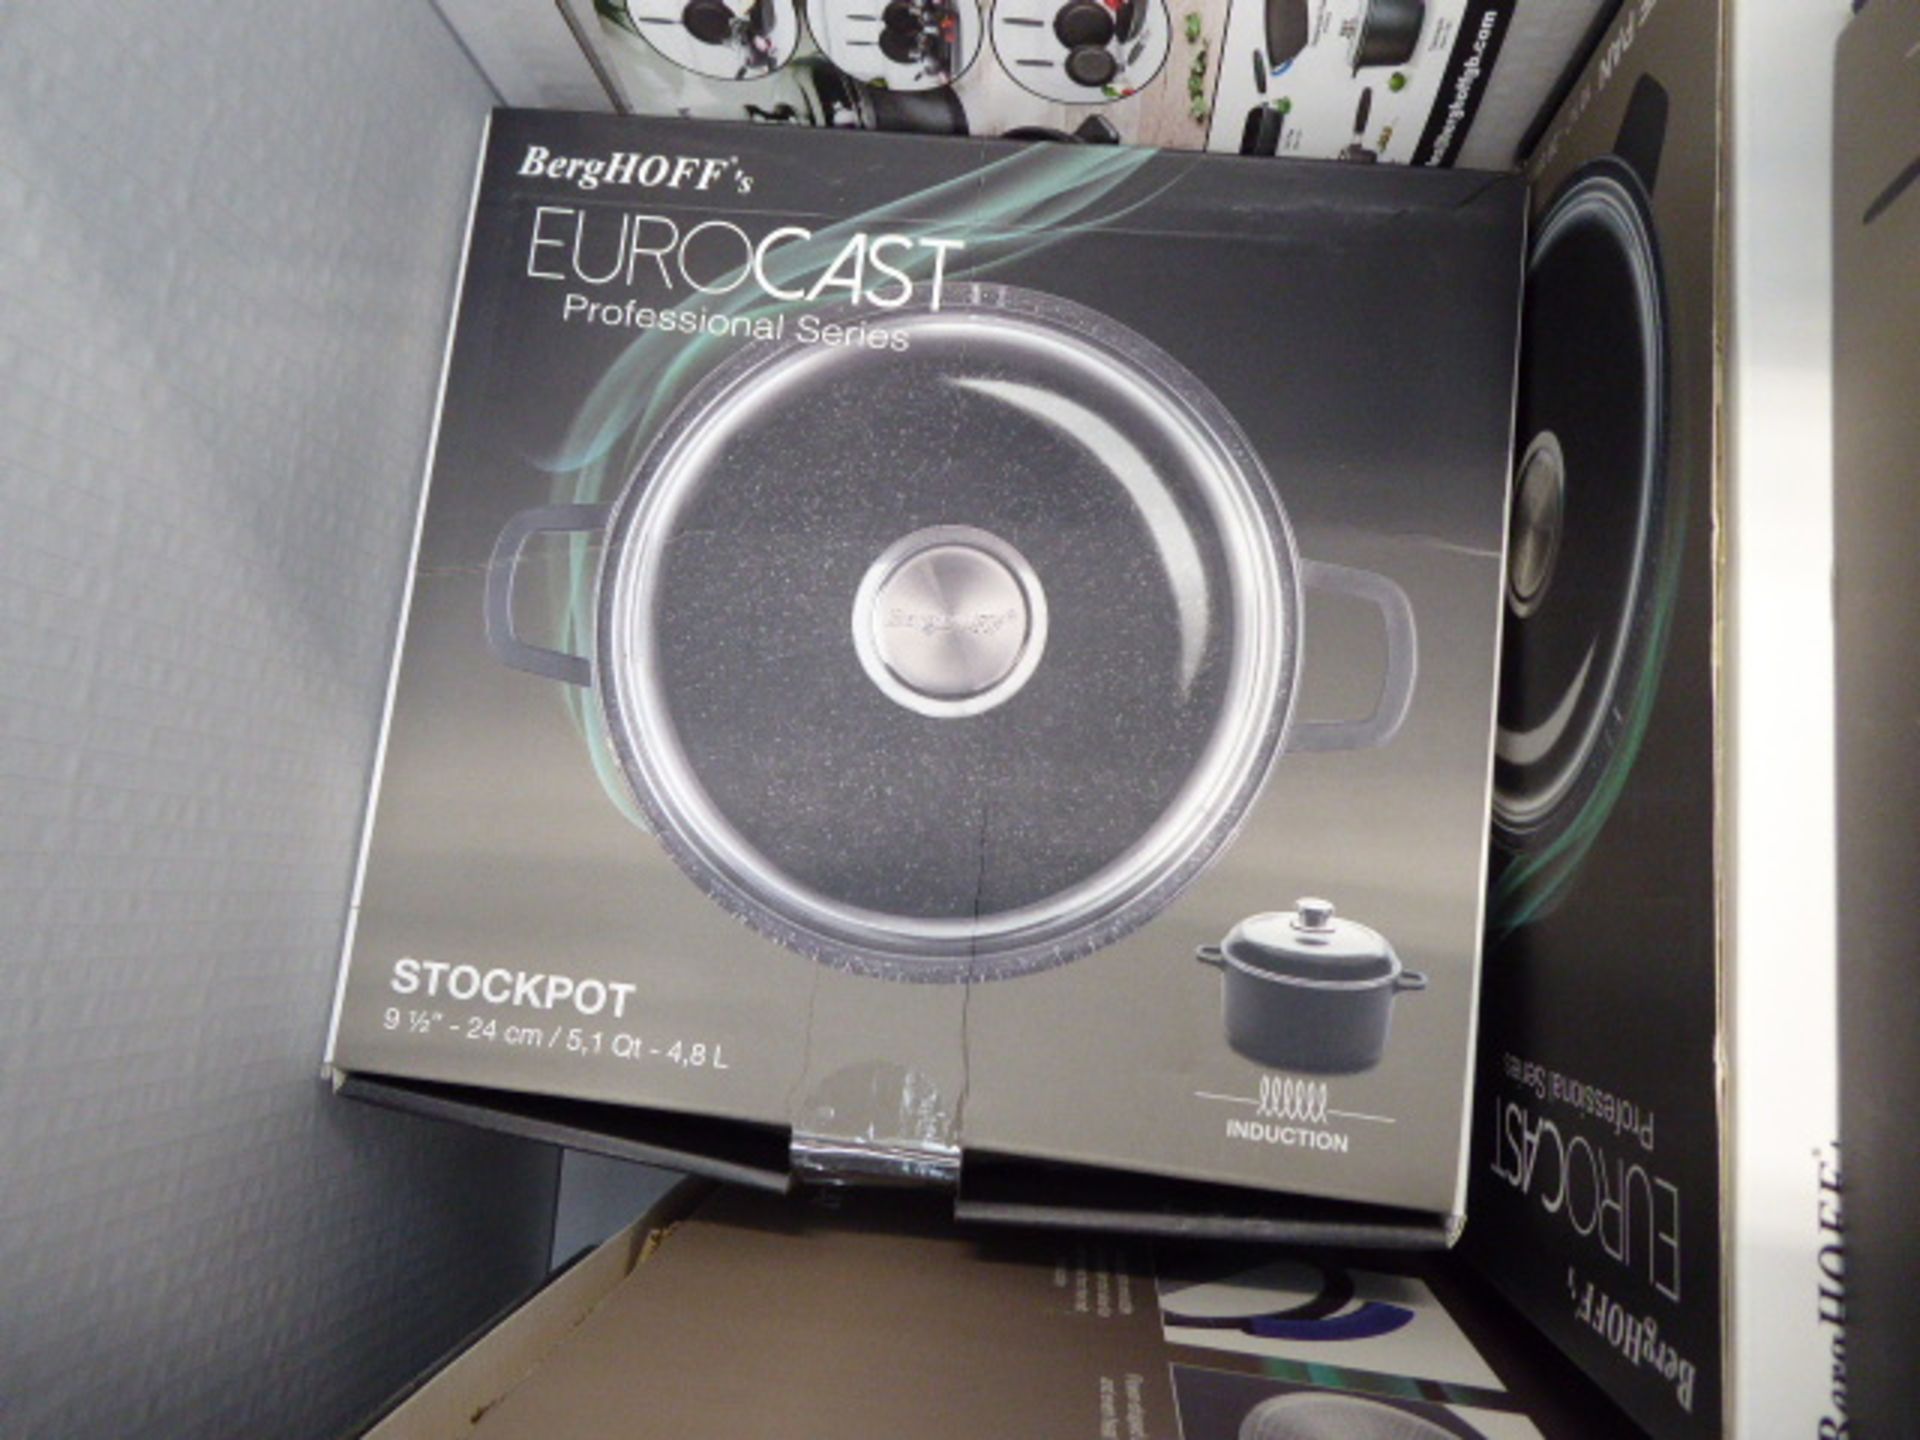 Boxed Eurocast Professional Series cookware set - Image 4 of 4